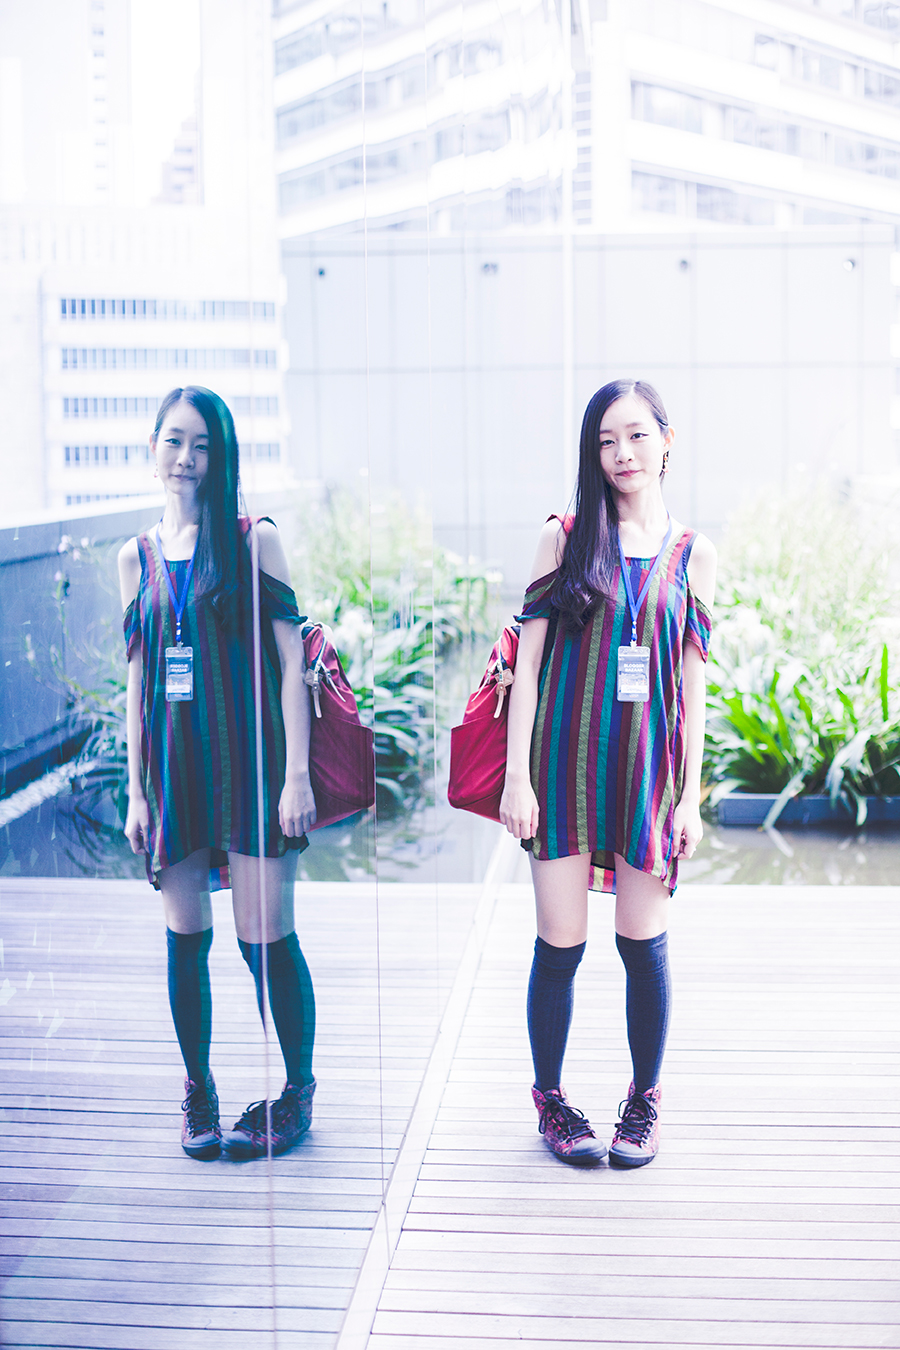 Outfit to the Lazada Singapore's Blogger Bazaar: Urban Outfitters striped dress, Tutuanna knit knee socks, Alexander McQueen x Puma sneakers.